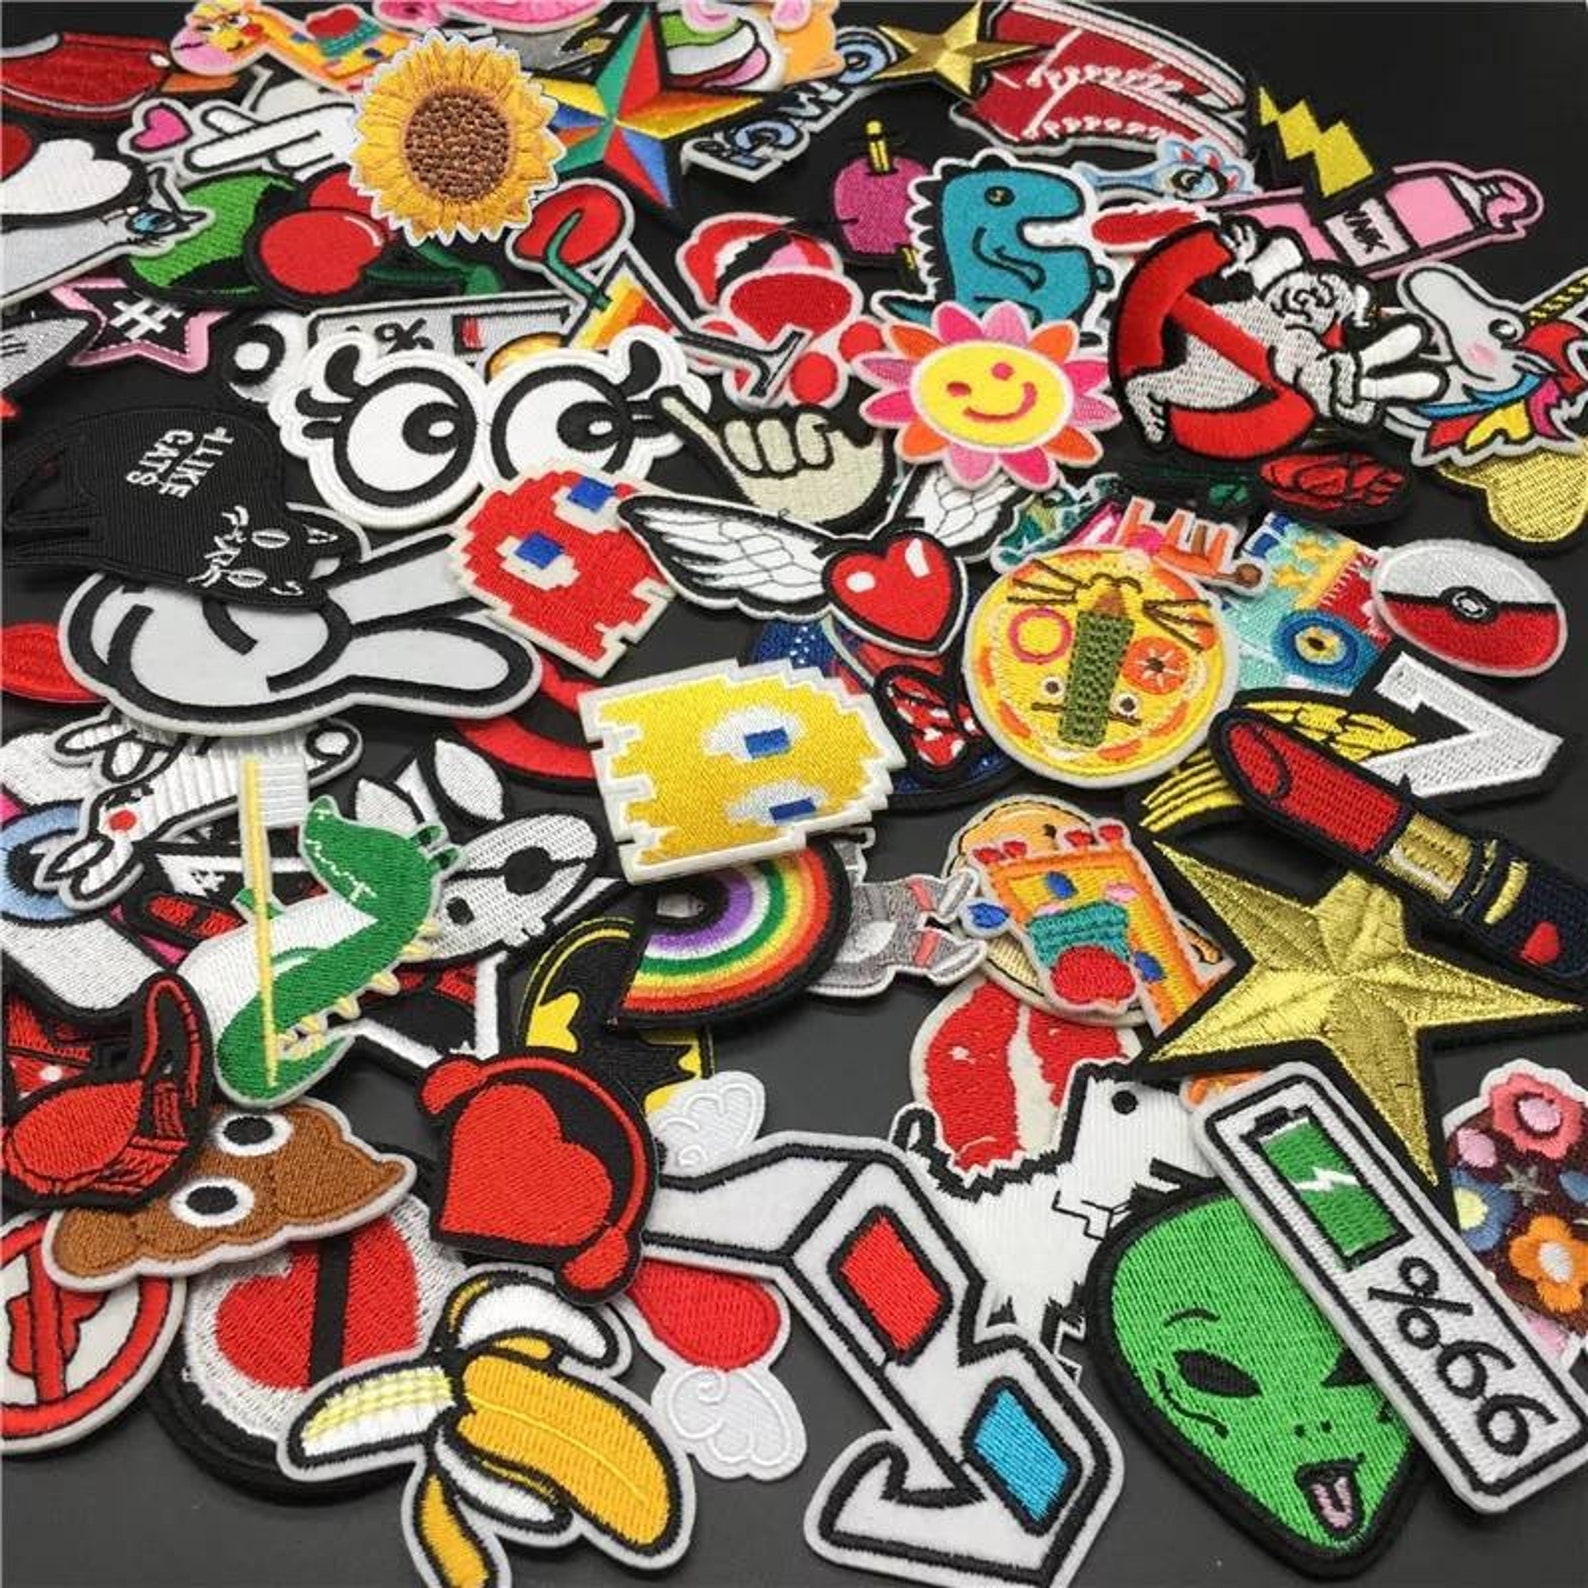 30pc Cool Embroidered Iron on Patches Bundle Lot - Etsy